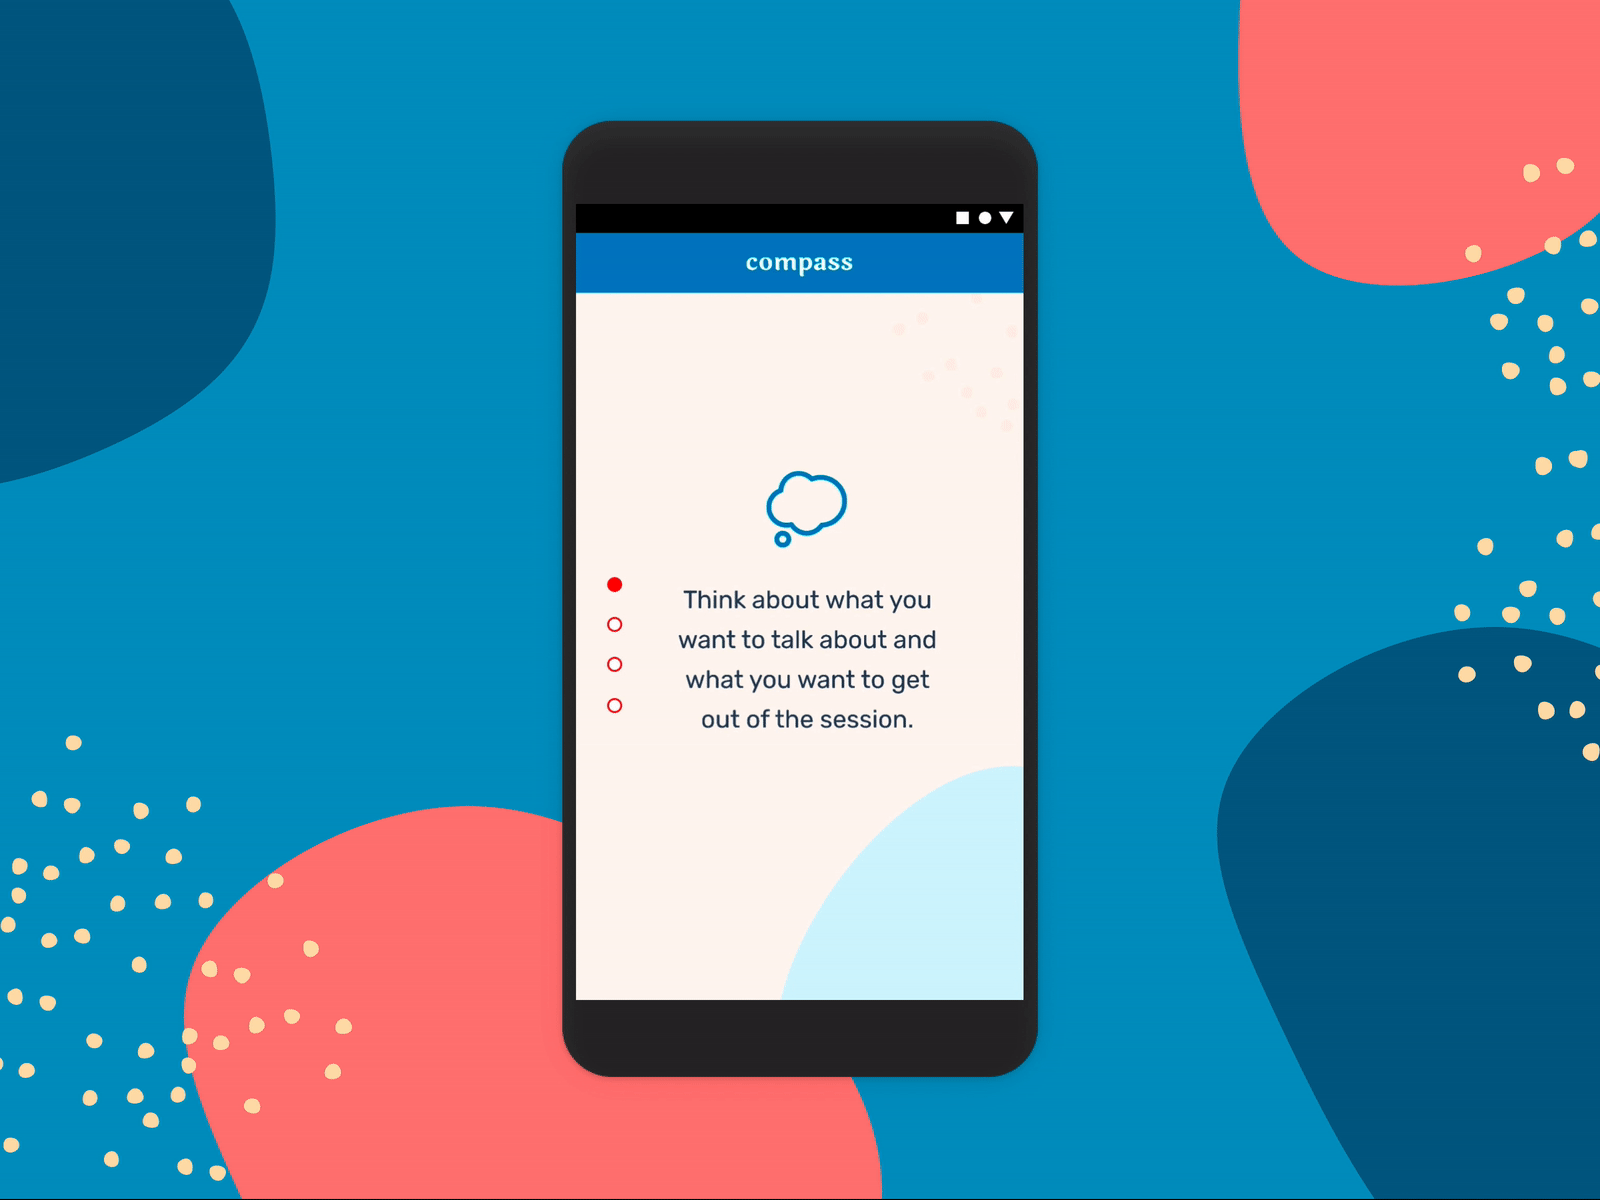 Mental Health How-To Guide counseling guide mental health mobile mobile app shapes ui design wellness